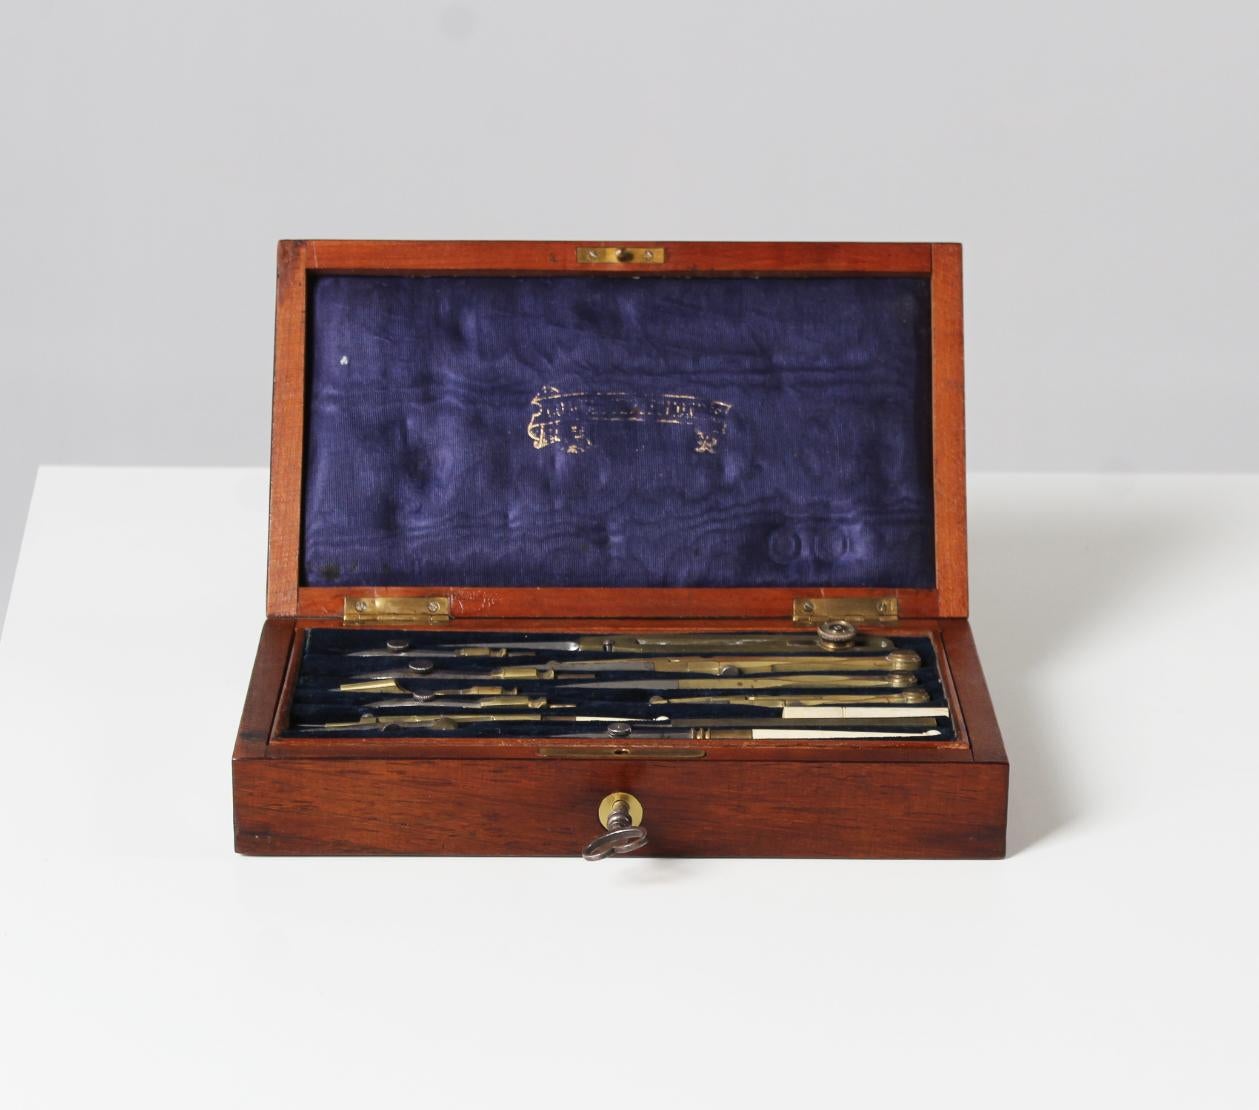 Box with antique drawing utensils

England
around 1880

Dimensions: H x W x D: 5 x 23 x 13 cm

Description:
Extensive set of antique measuring and drawing tools in the original casket.

Flat, rectangular wooden box with brass thread